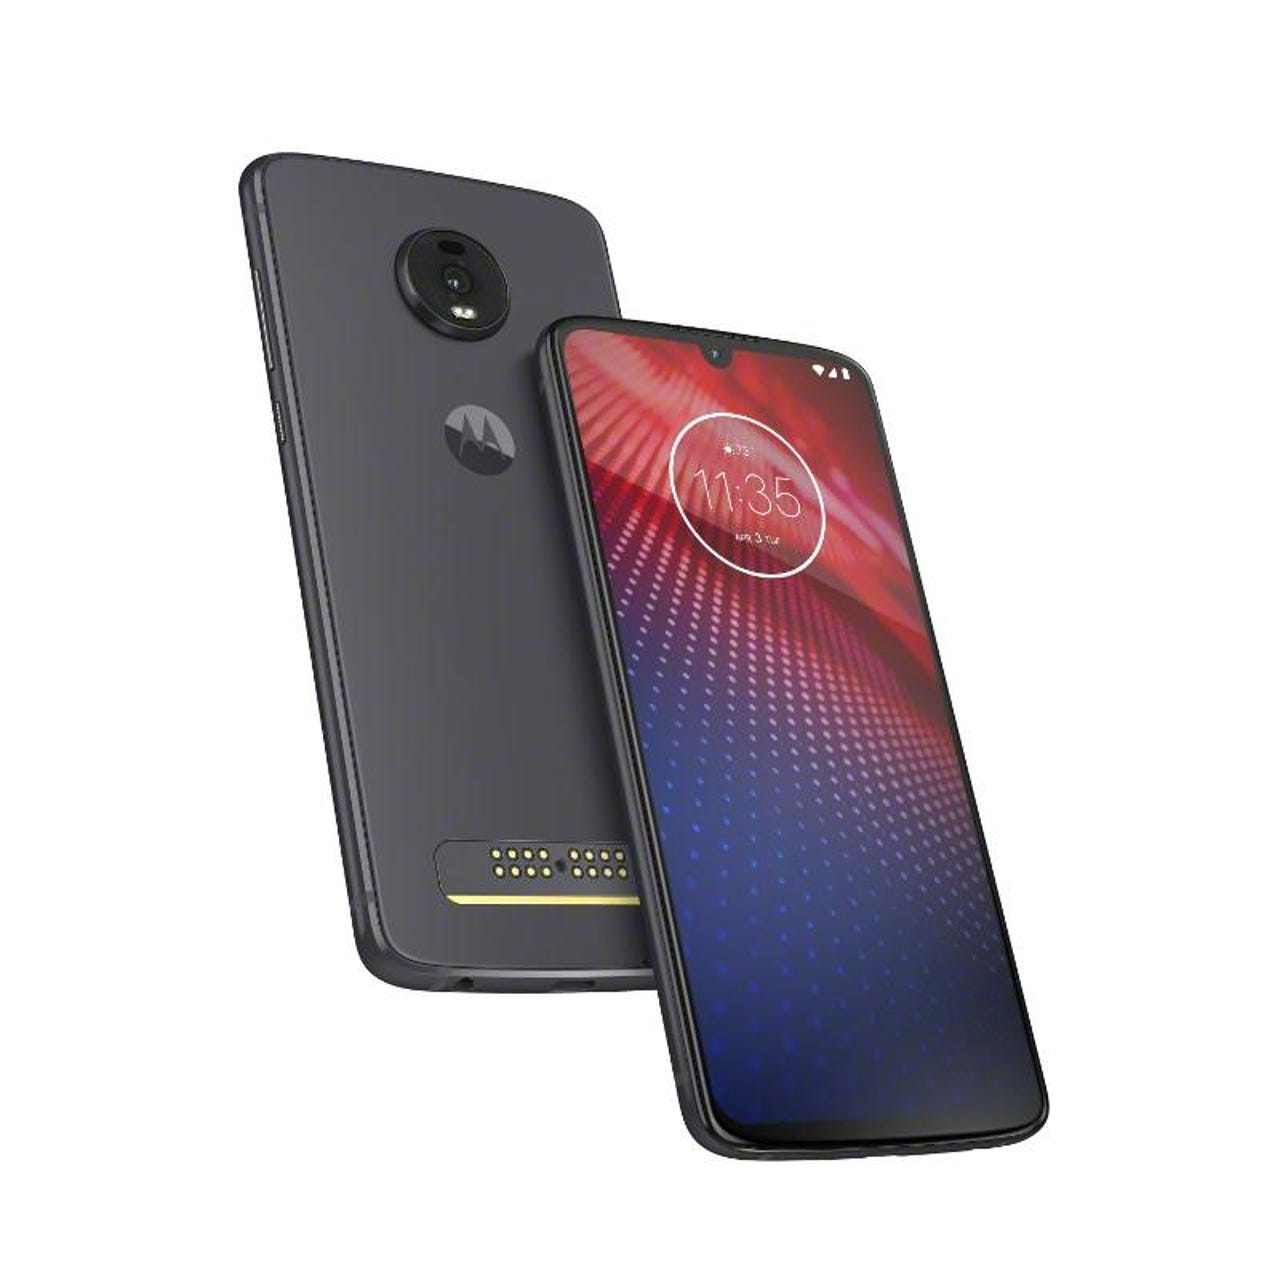  Moto Z4 with Alexa Hands-Free (Moto 360 camera included) –  Unlocked Smartphone – 128 GB – Frost White : Cell Phones & Accessories